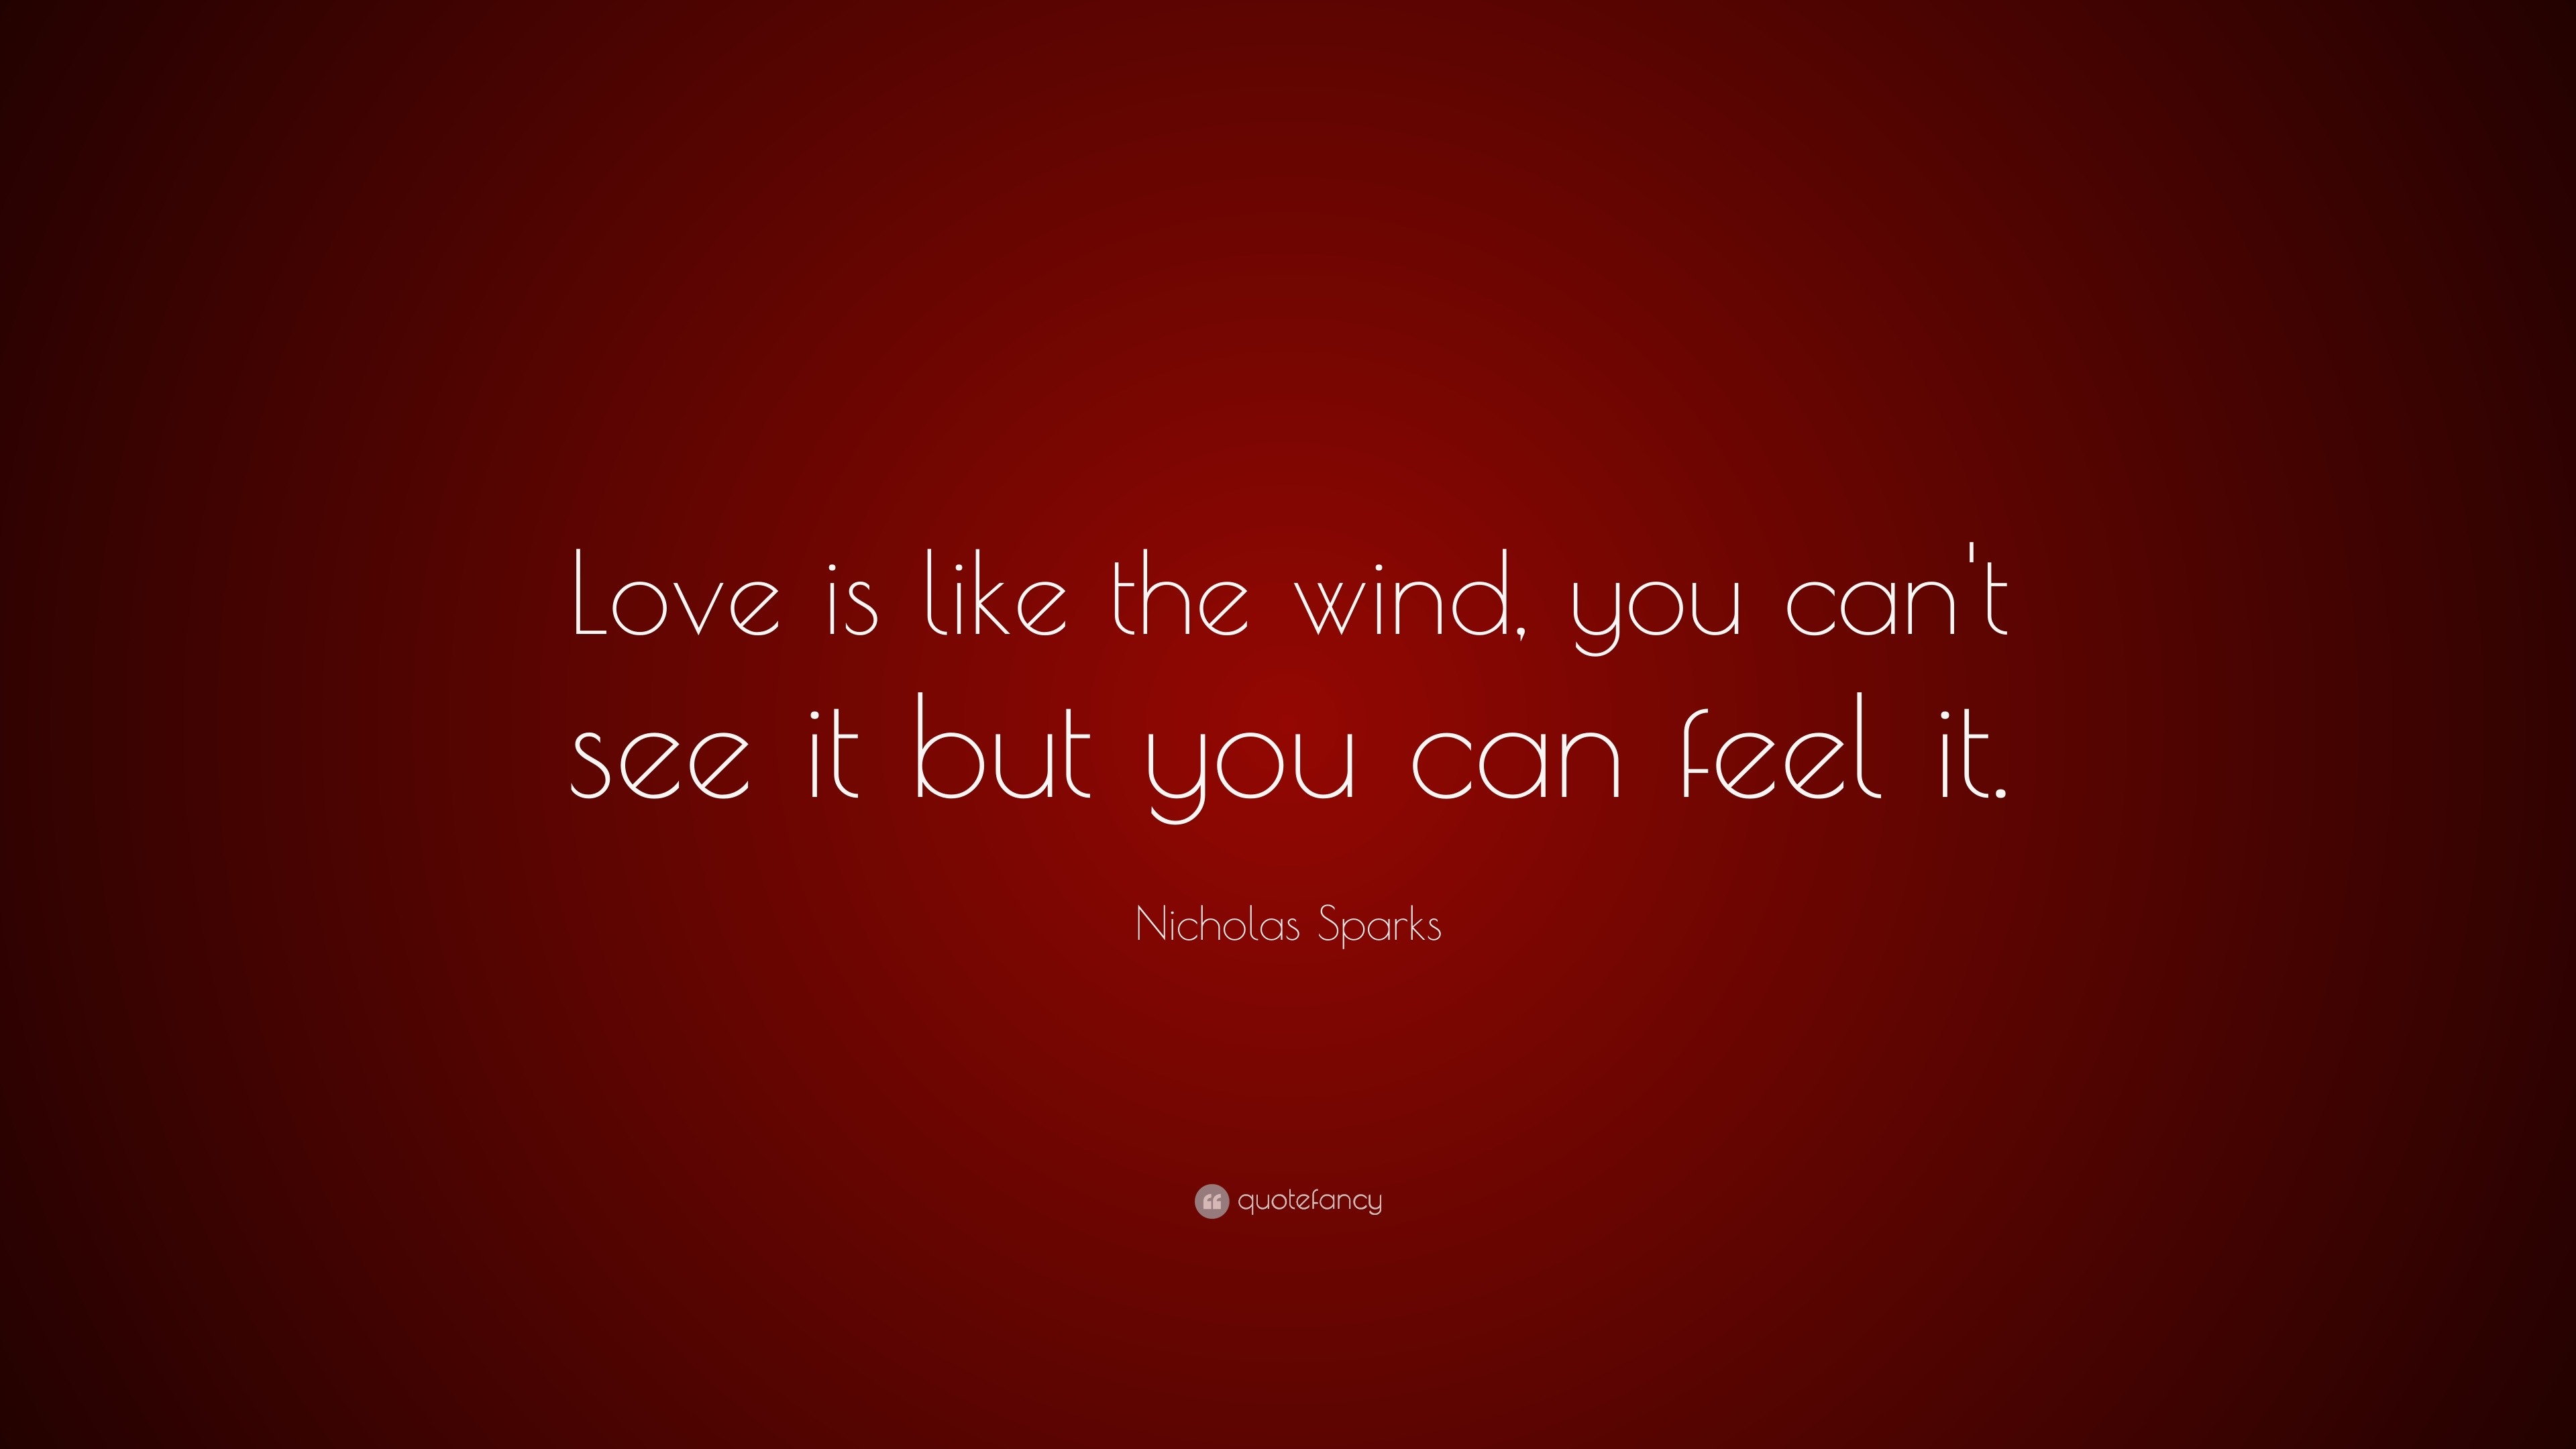 Nicholas Sparks Quote Love is like the wind you can t see